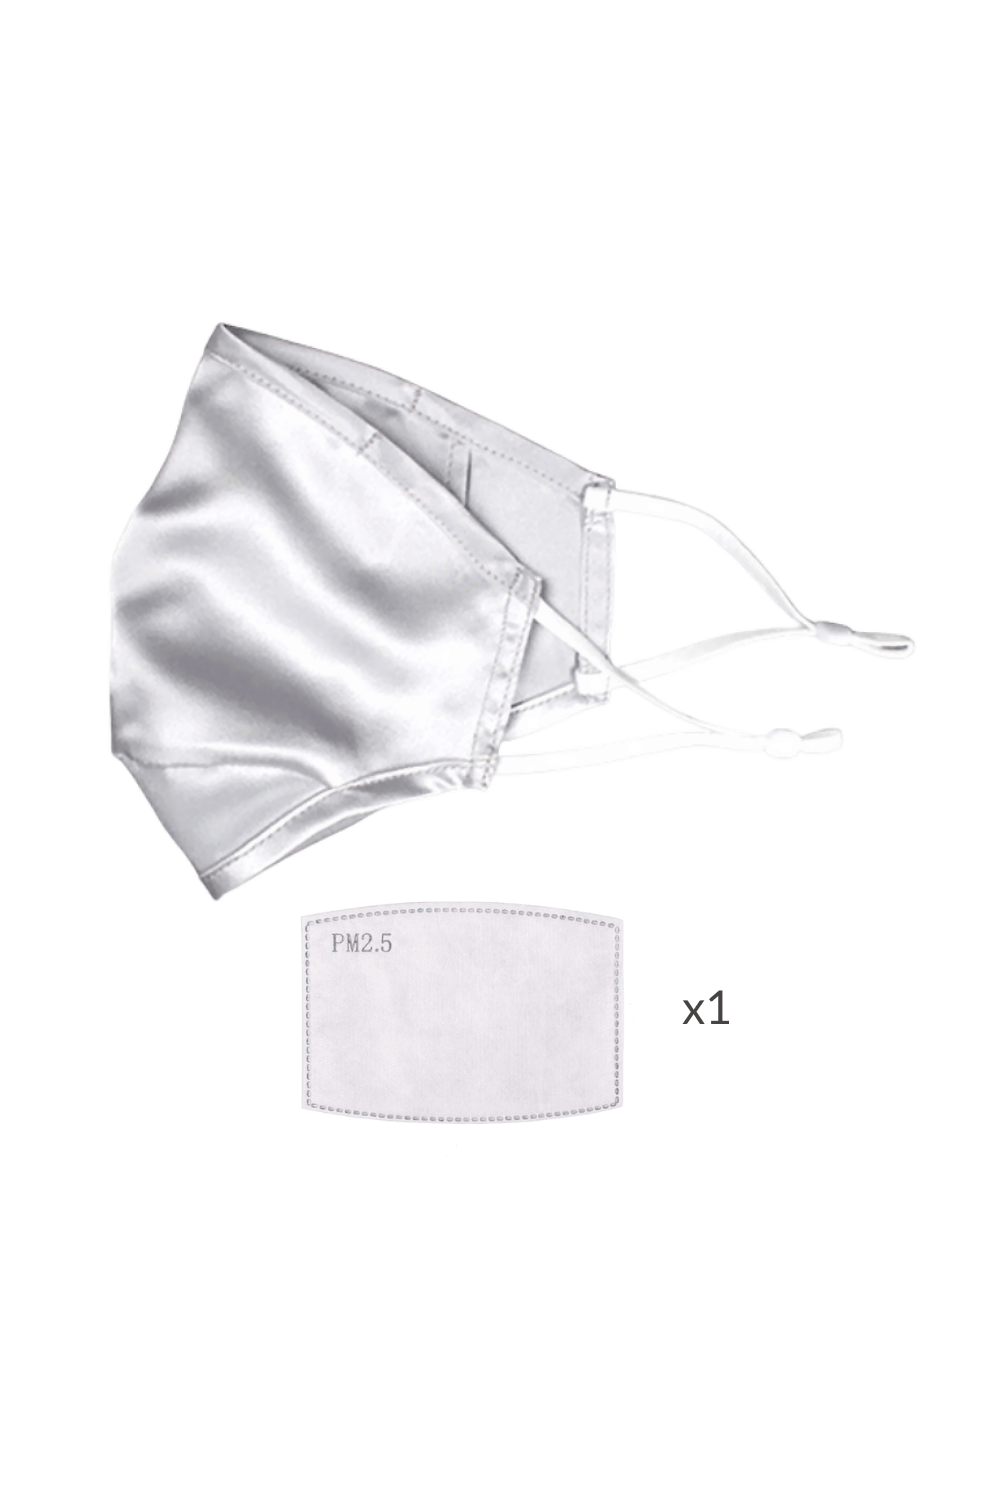 ULTRA Silk Face Mask - Silver (with Filter Pocket and Nose Wire) - BASK ™